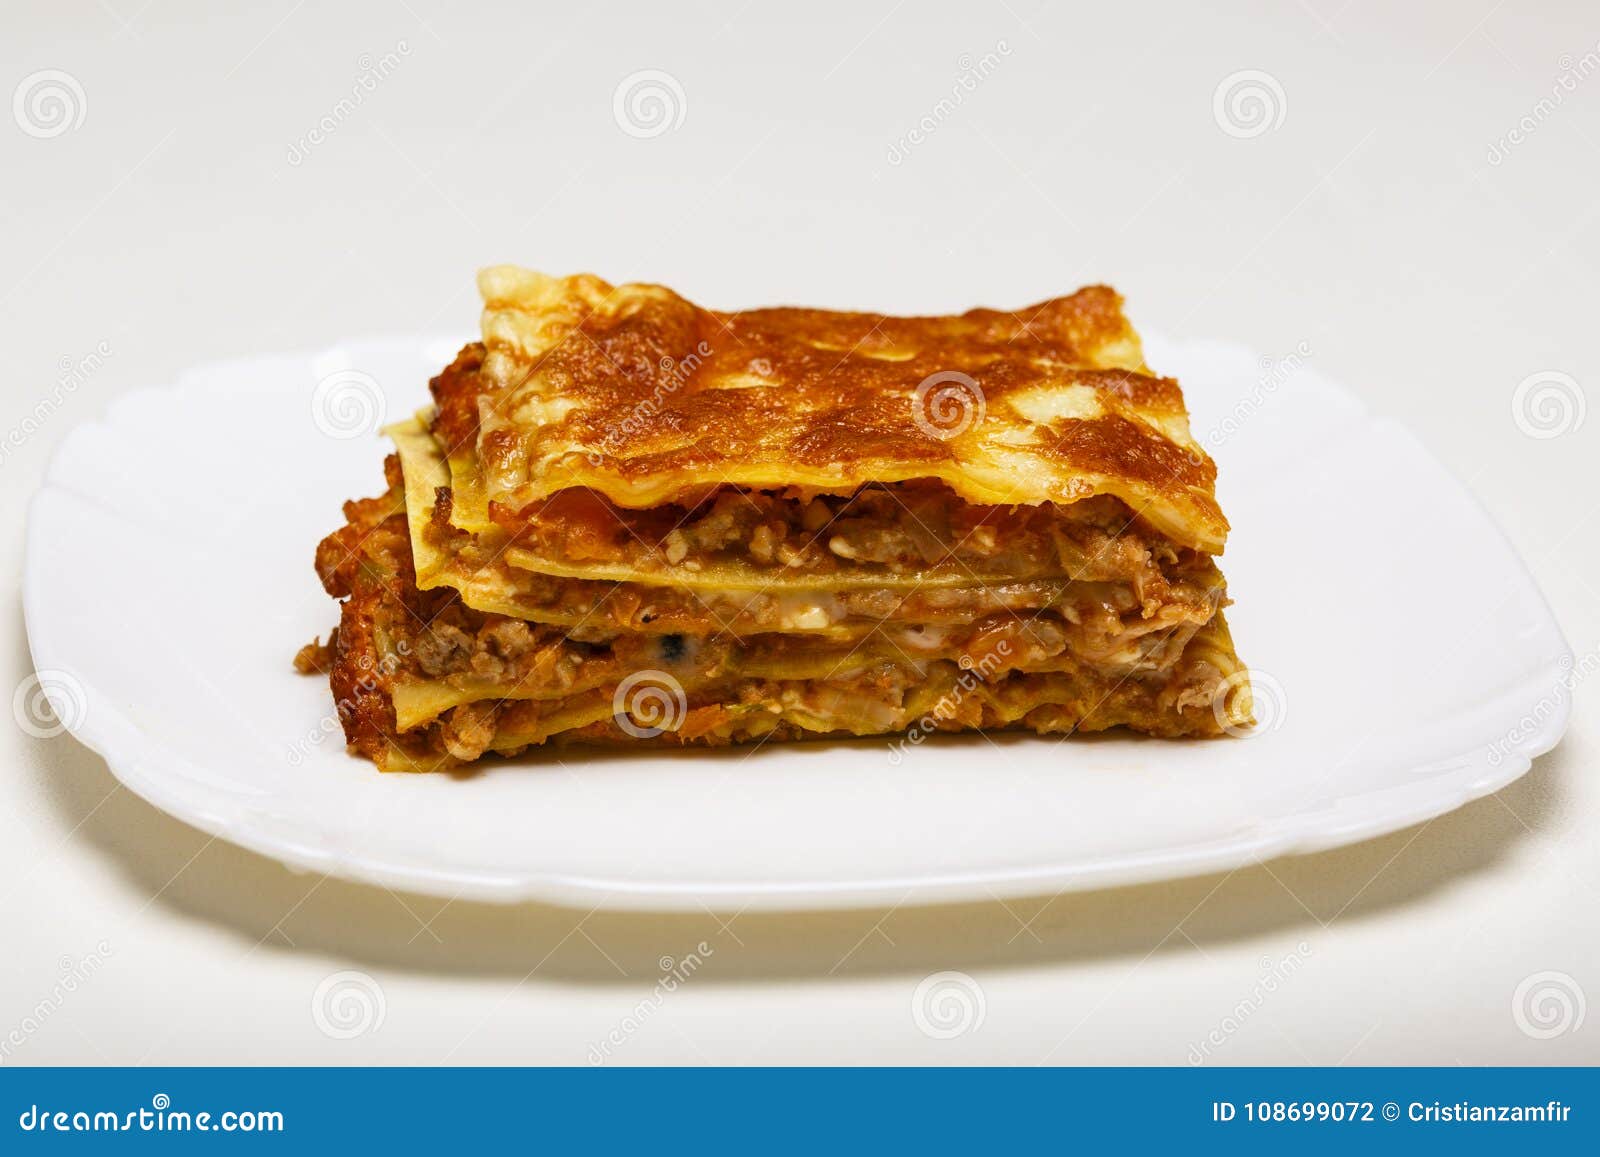 Lasagna made in a home stock photo. Image of gourmet - 108699072